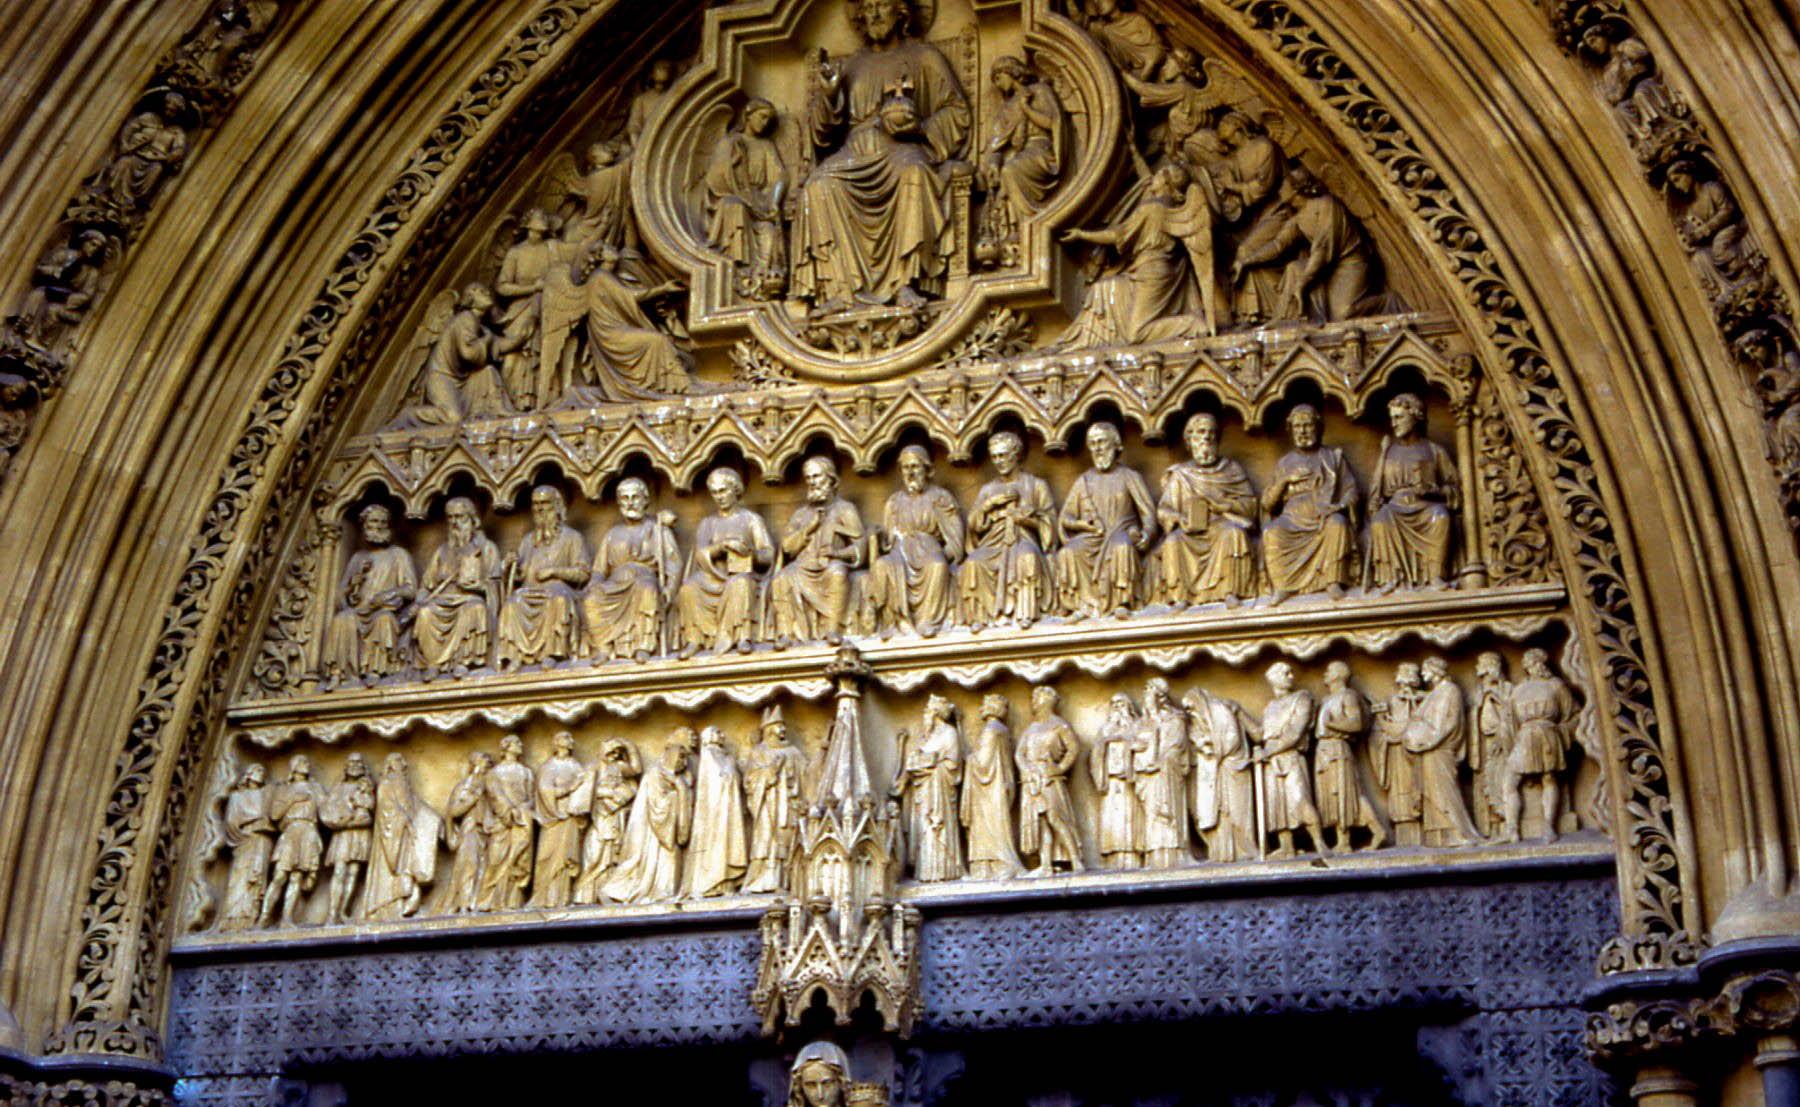 a carving of a group of people on display in a building